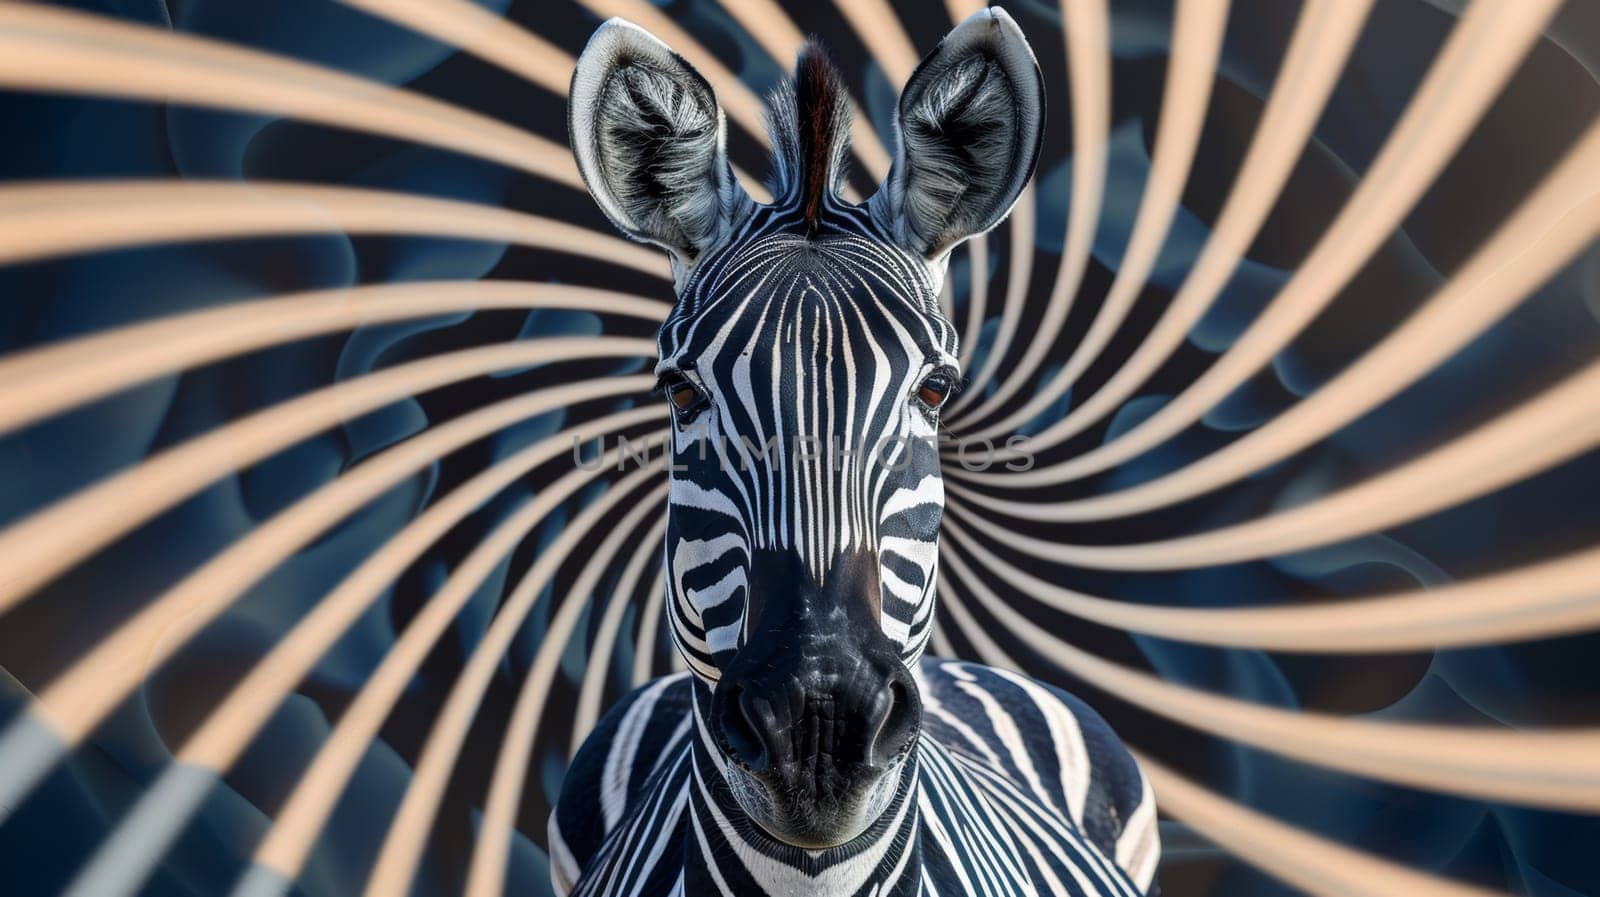 A zebra is shown in a spiral pattern with black and white stripes, AI by starush